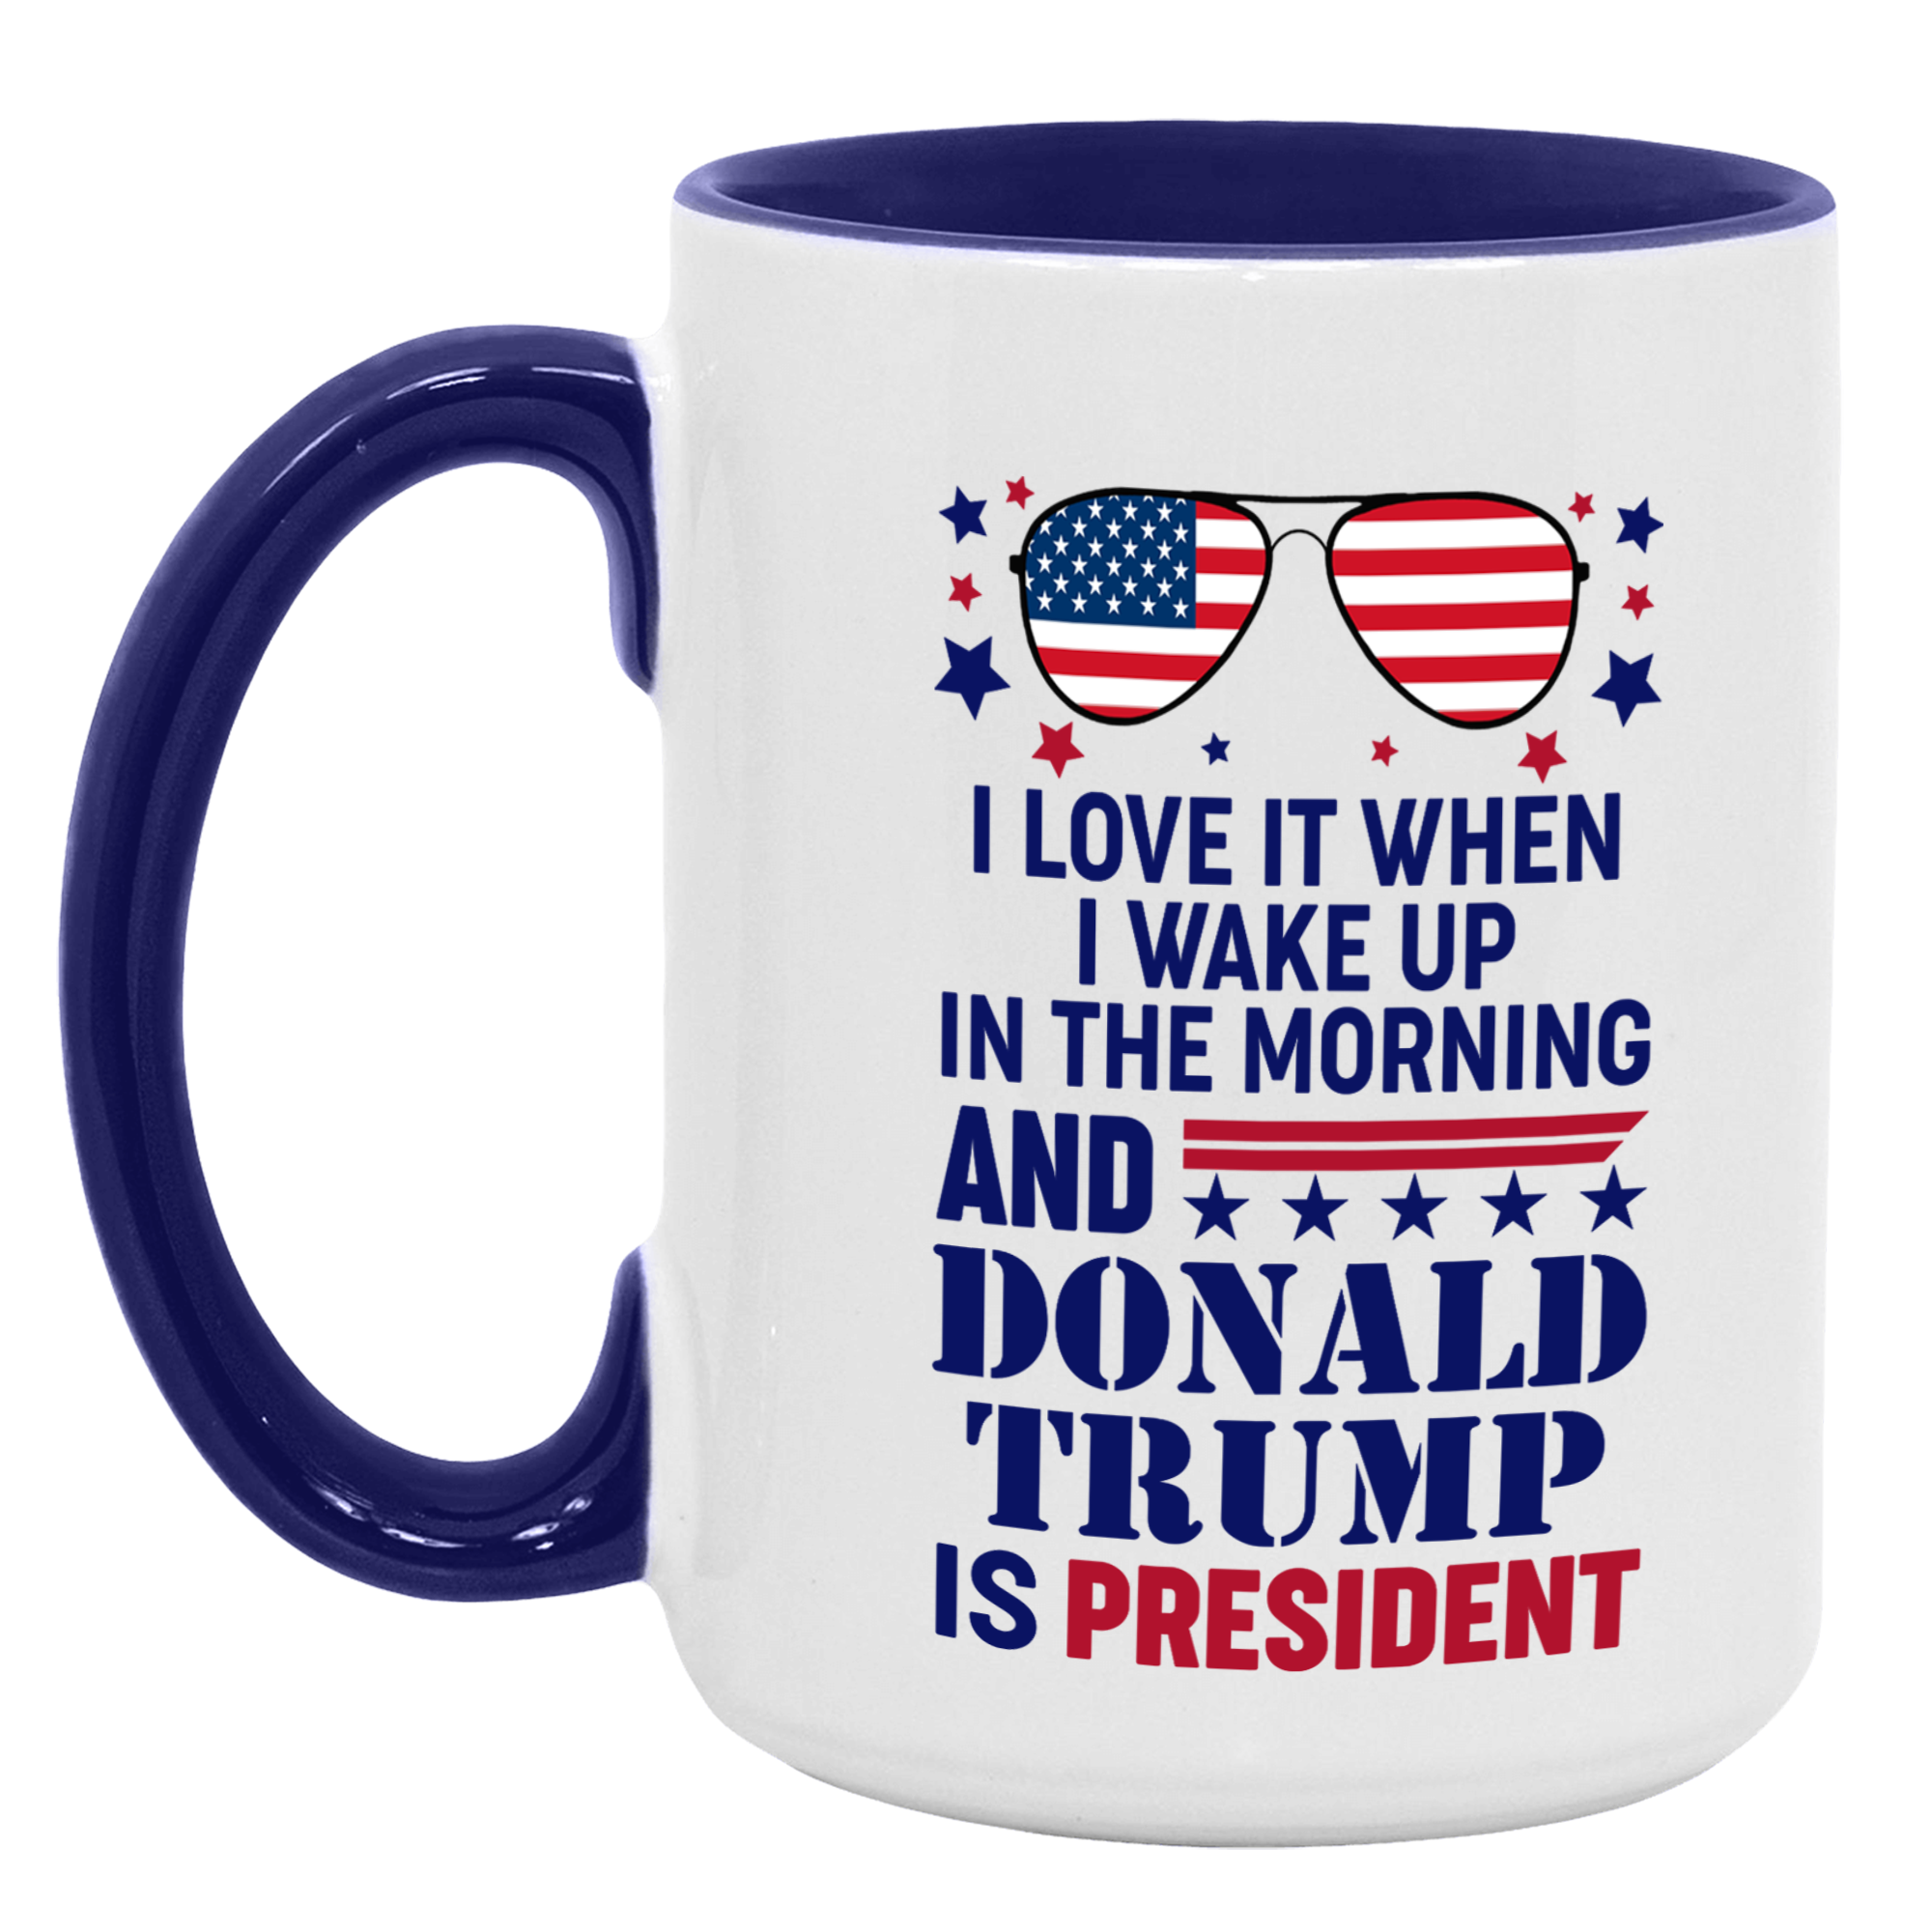 I Love It When I Wake Up In The Morning And Donald Trump Is President Mug - GB-M16